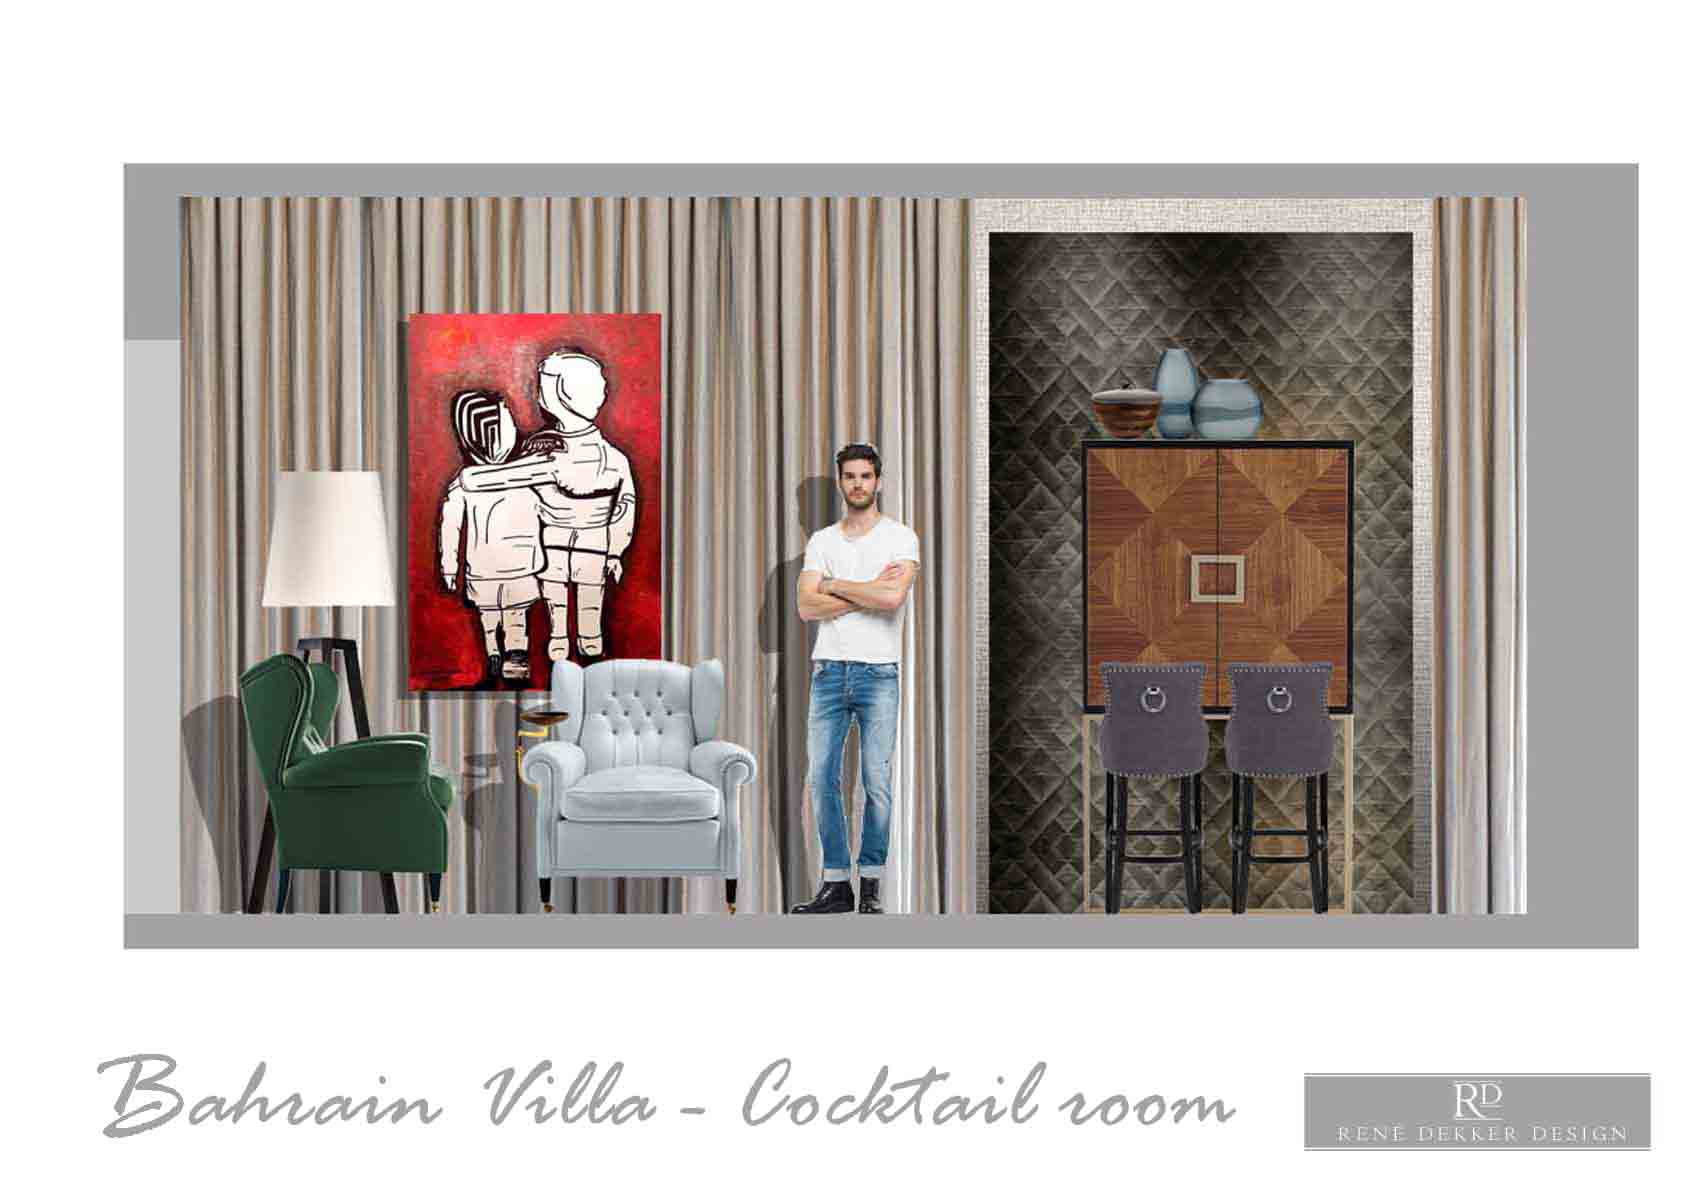 Colour rendered elevation, cocktail room, curtained walls, colourful art, arm chair